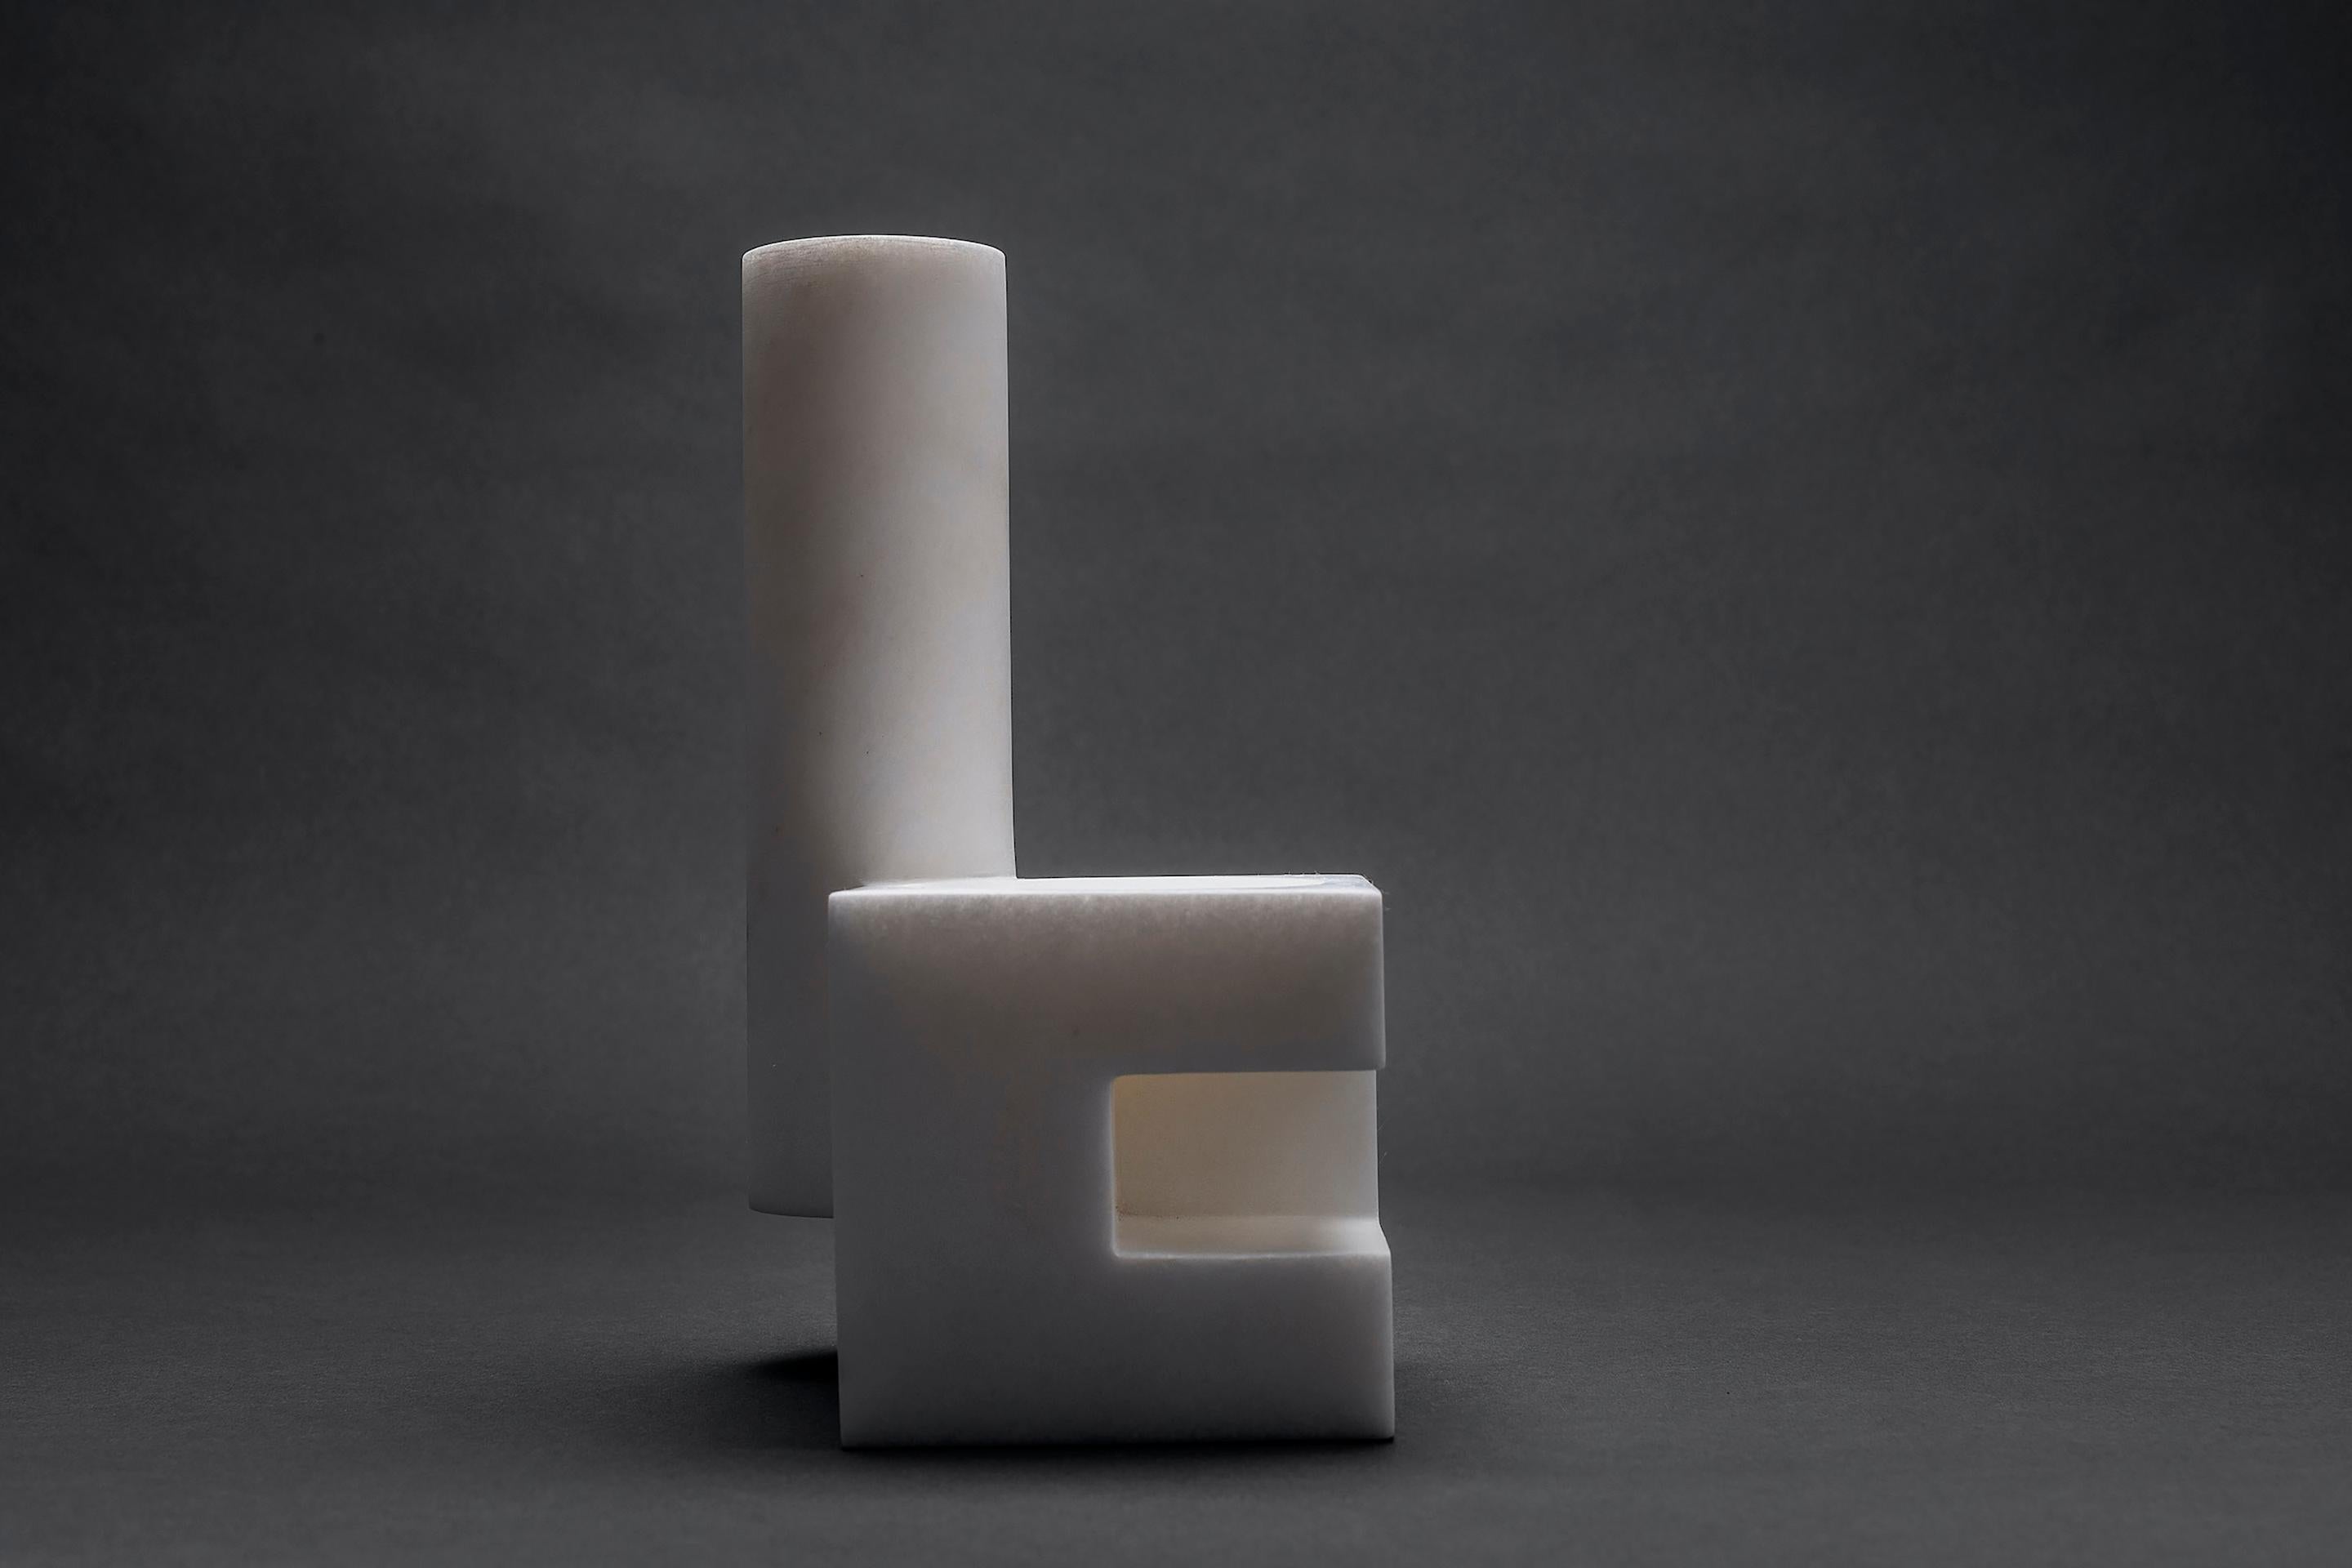 With Galeana, Jorge Diego Etienne aims to send a strong and unique message through the unpredictable beauty of alabaster. The collaboration also builds a bridge between the artisanal process of carving this stone and a contemporary proposal of